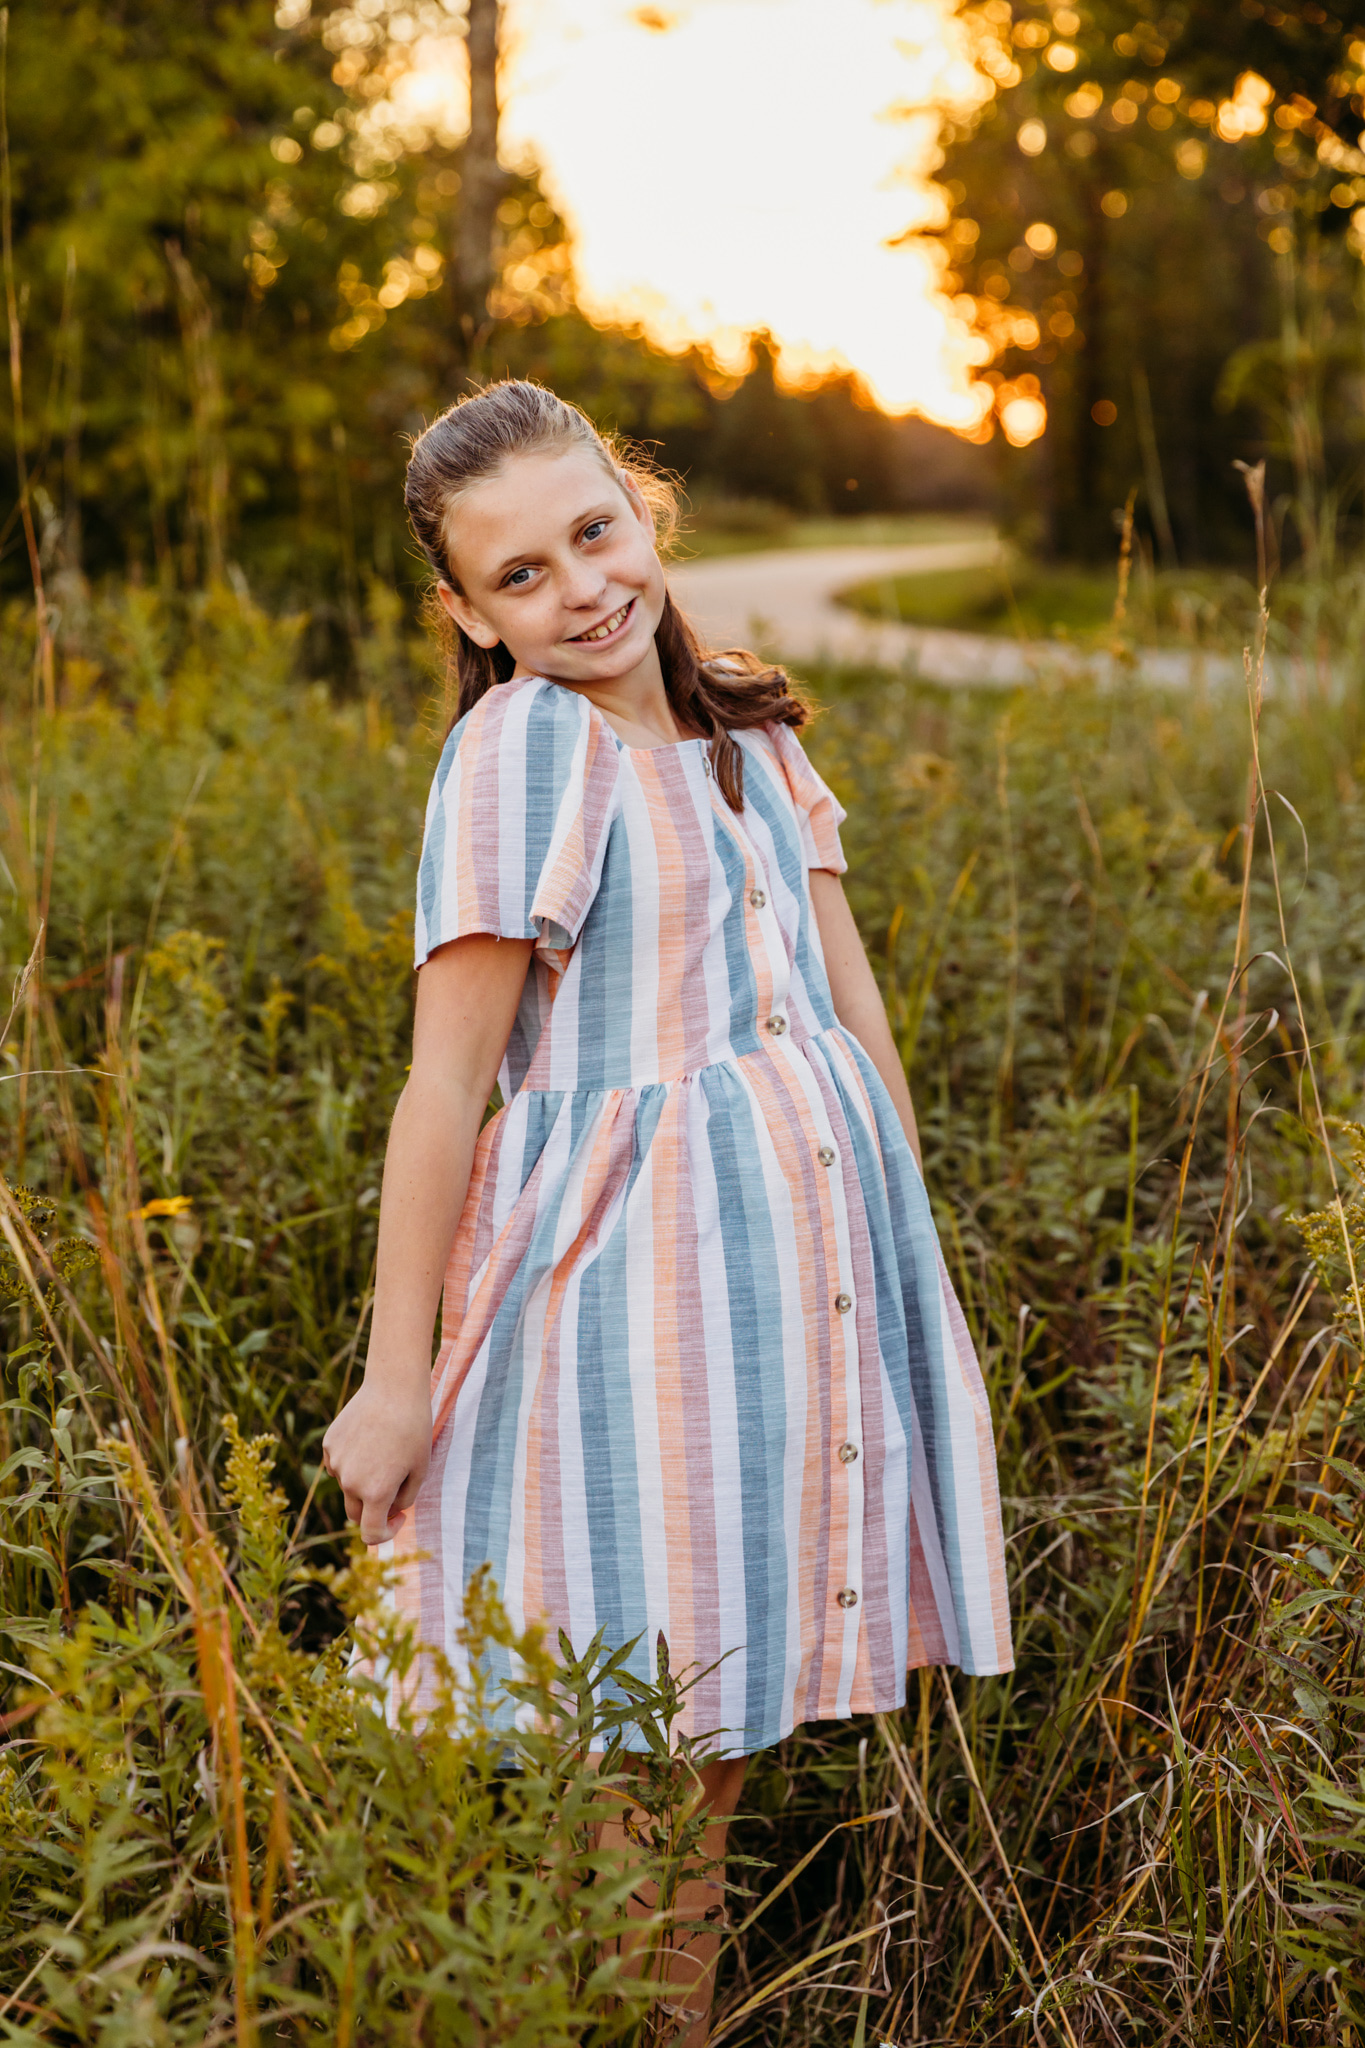 A young girl stands in a tall grass park field at sunset while twirling her striped colorful dress things to do in Fond du lac